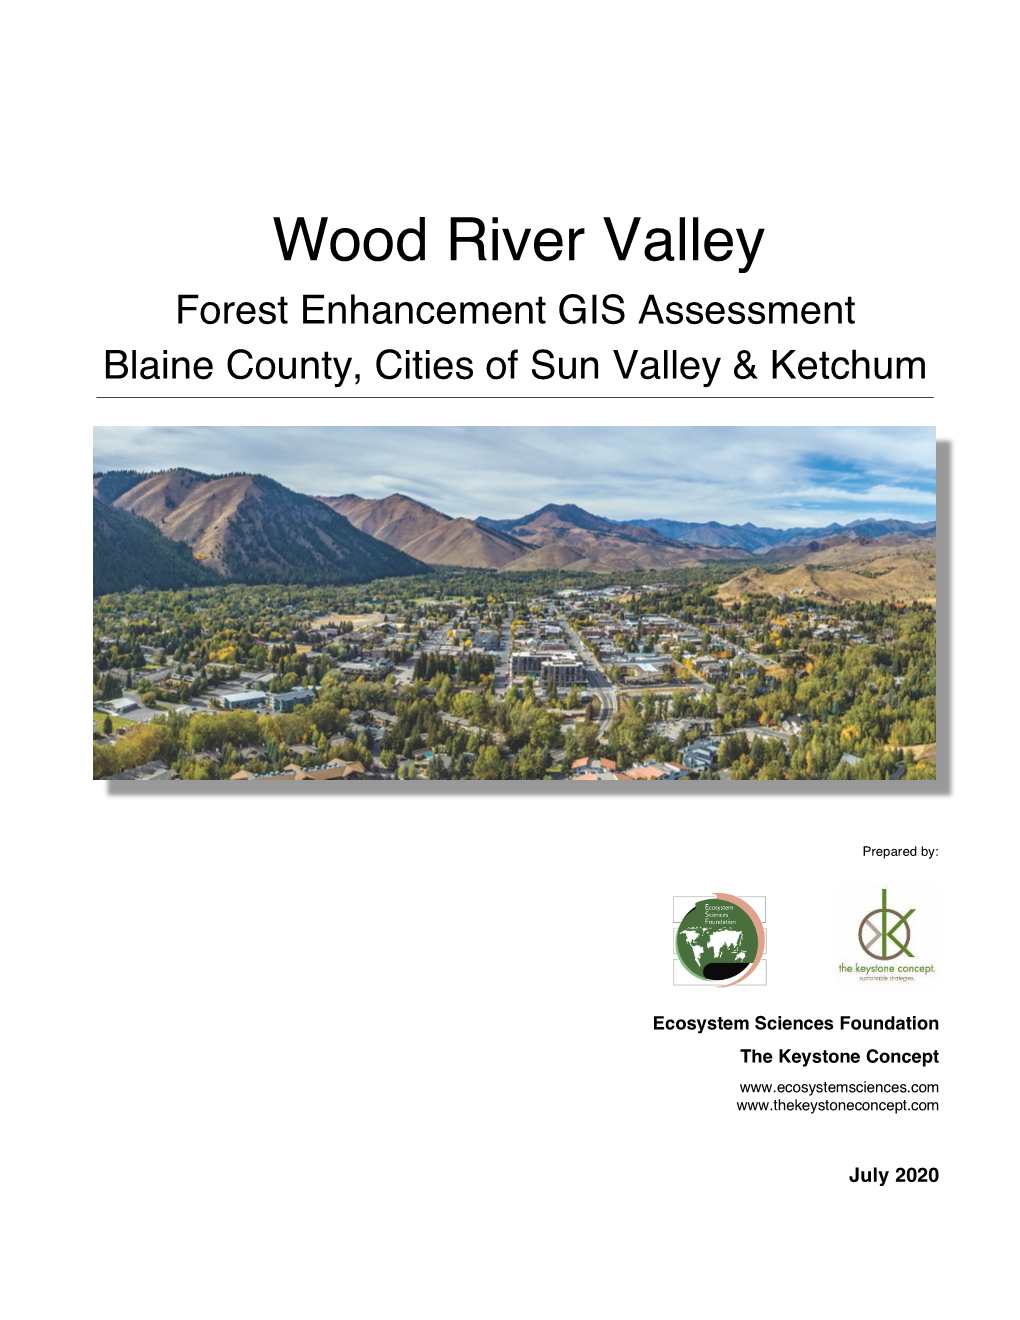 Wood River Valley Forest Enhancement GIS Assessment Blaine County, Cities of Sun Valley & Ketchum